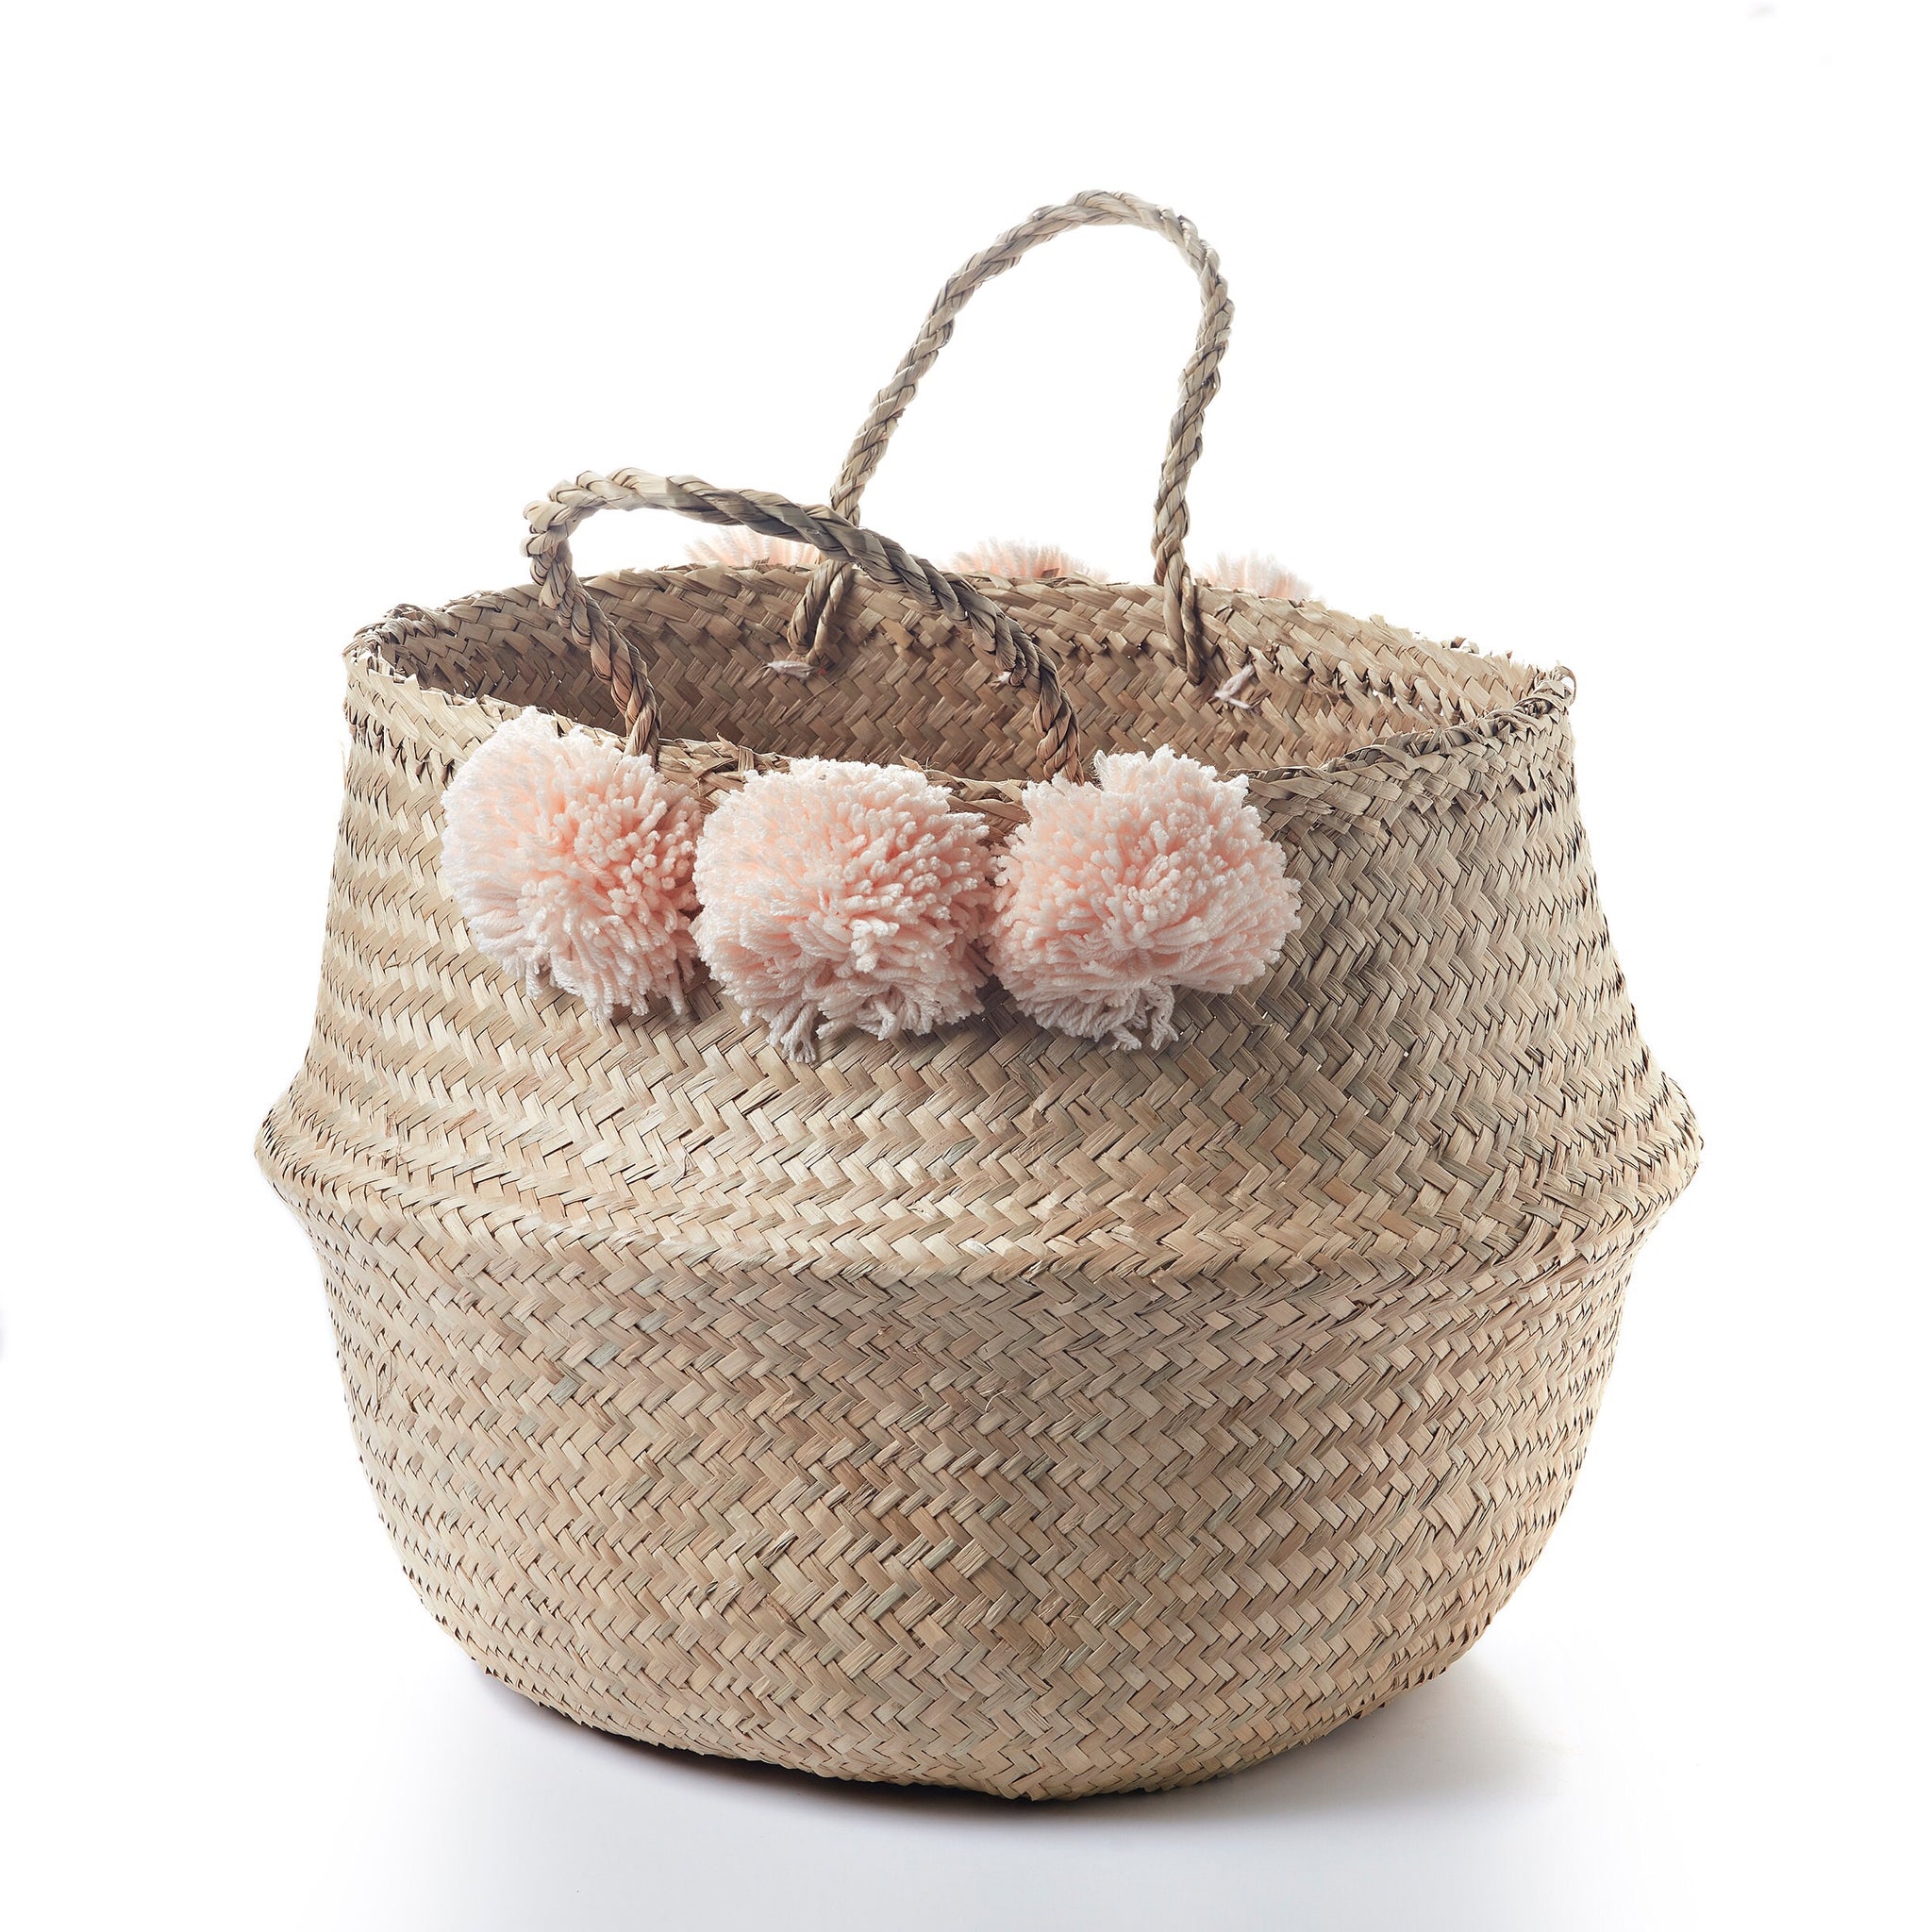 Pinkov Seagrass basket - Stitches and Tweed pink pom pom seagrass belly bakset 